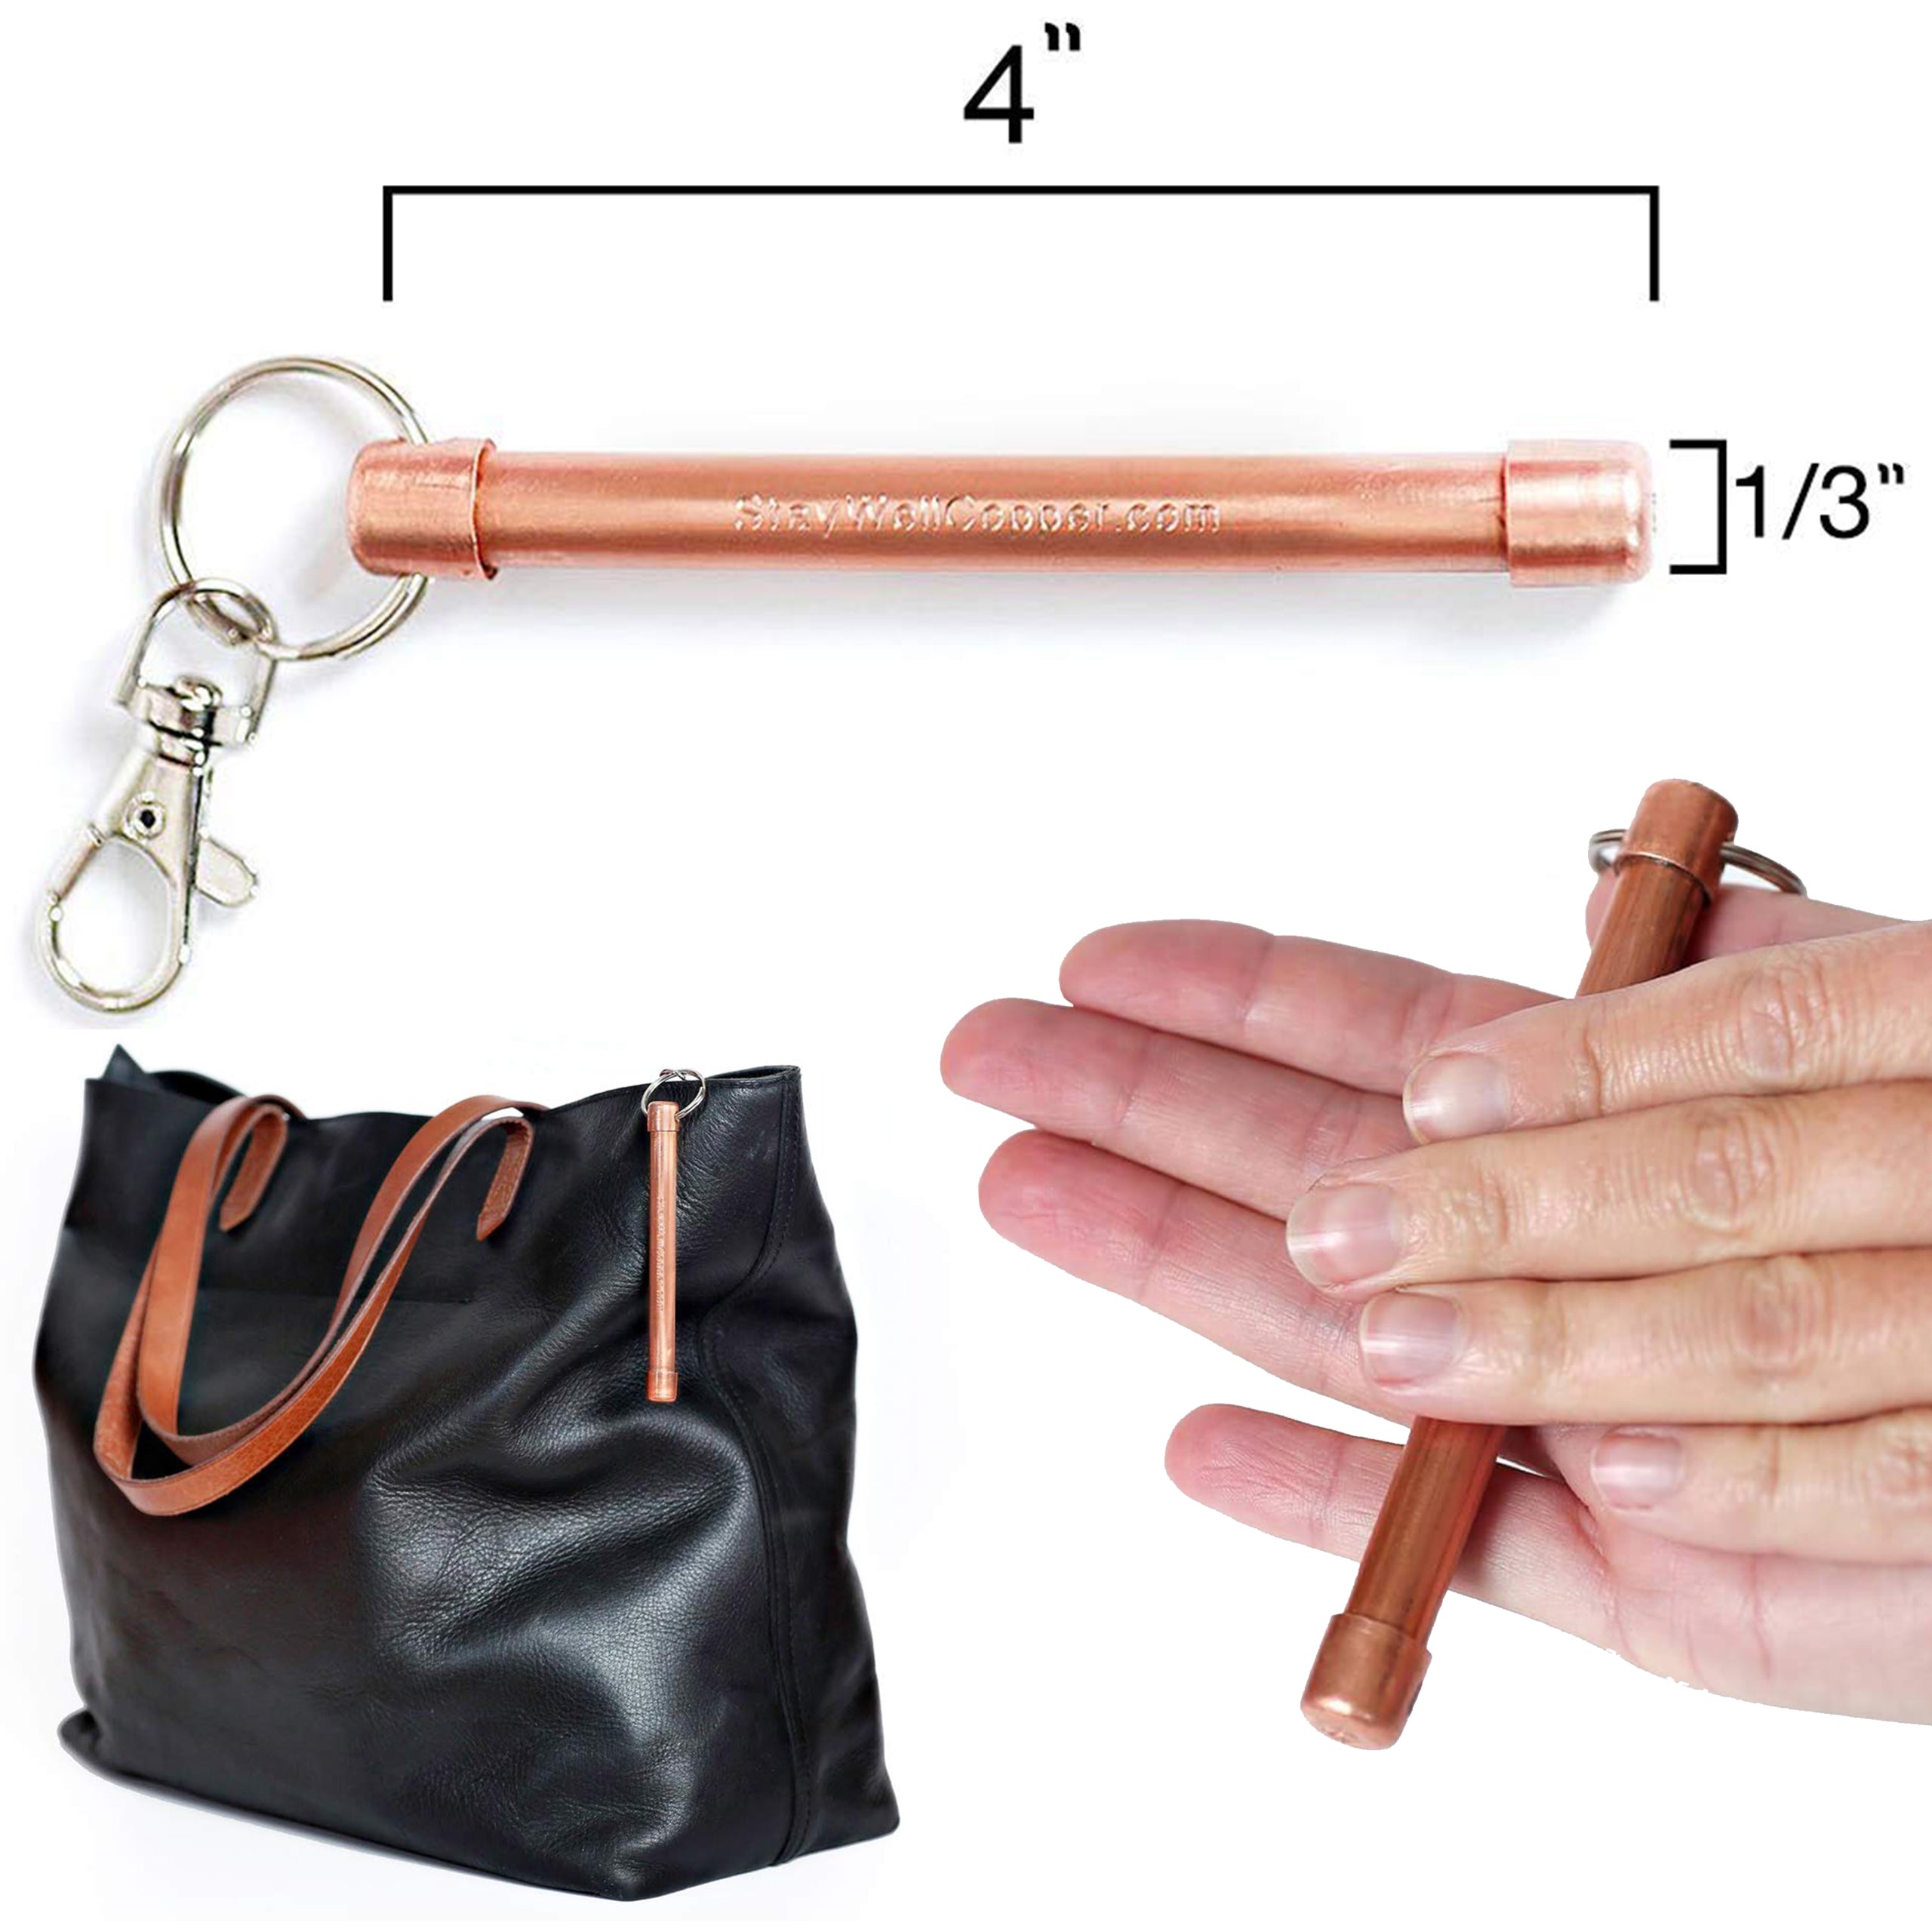 Shows One 4" Magic Wand Hand Roller with swivel keyclip between hands, also attached to the zipper pull of a handbag. Made in USA from natural antimicrobial copper. Roll between hands to kill 99.97% of bacteria, virus, and germs. All Natural Hand Sanitizers, Chemical Free, Lasts Forever. Will not chap hands or make sore. Recyclable. EPA registered. Patented